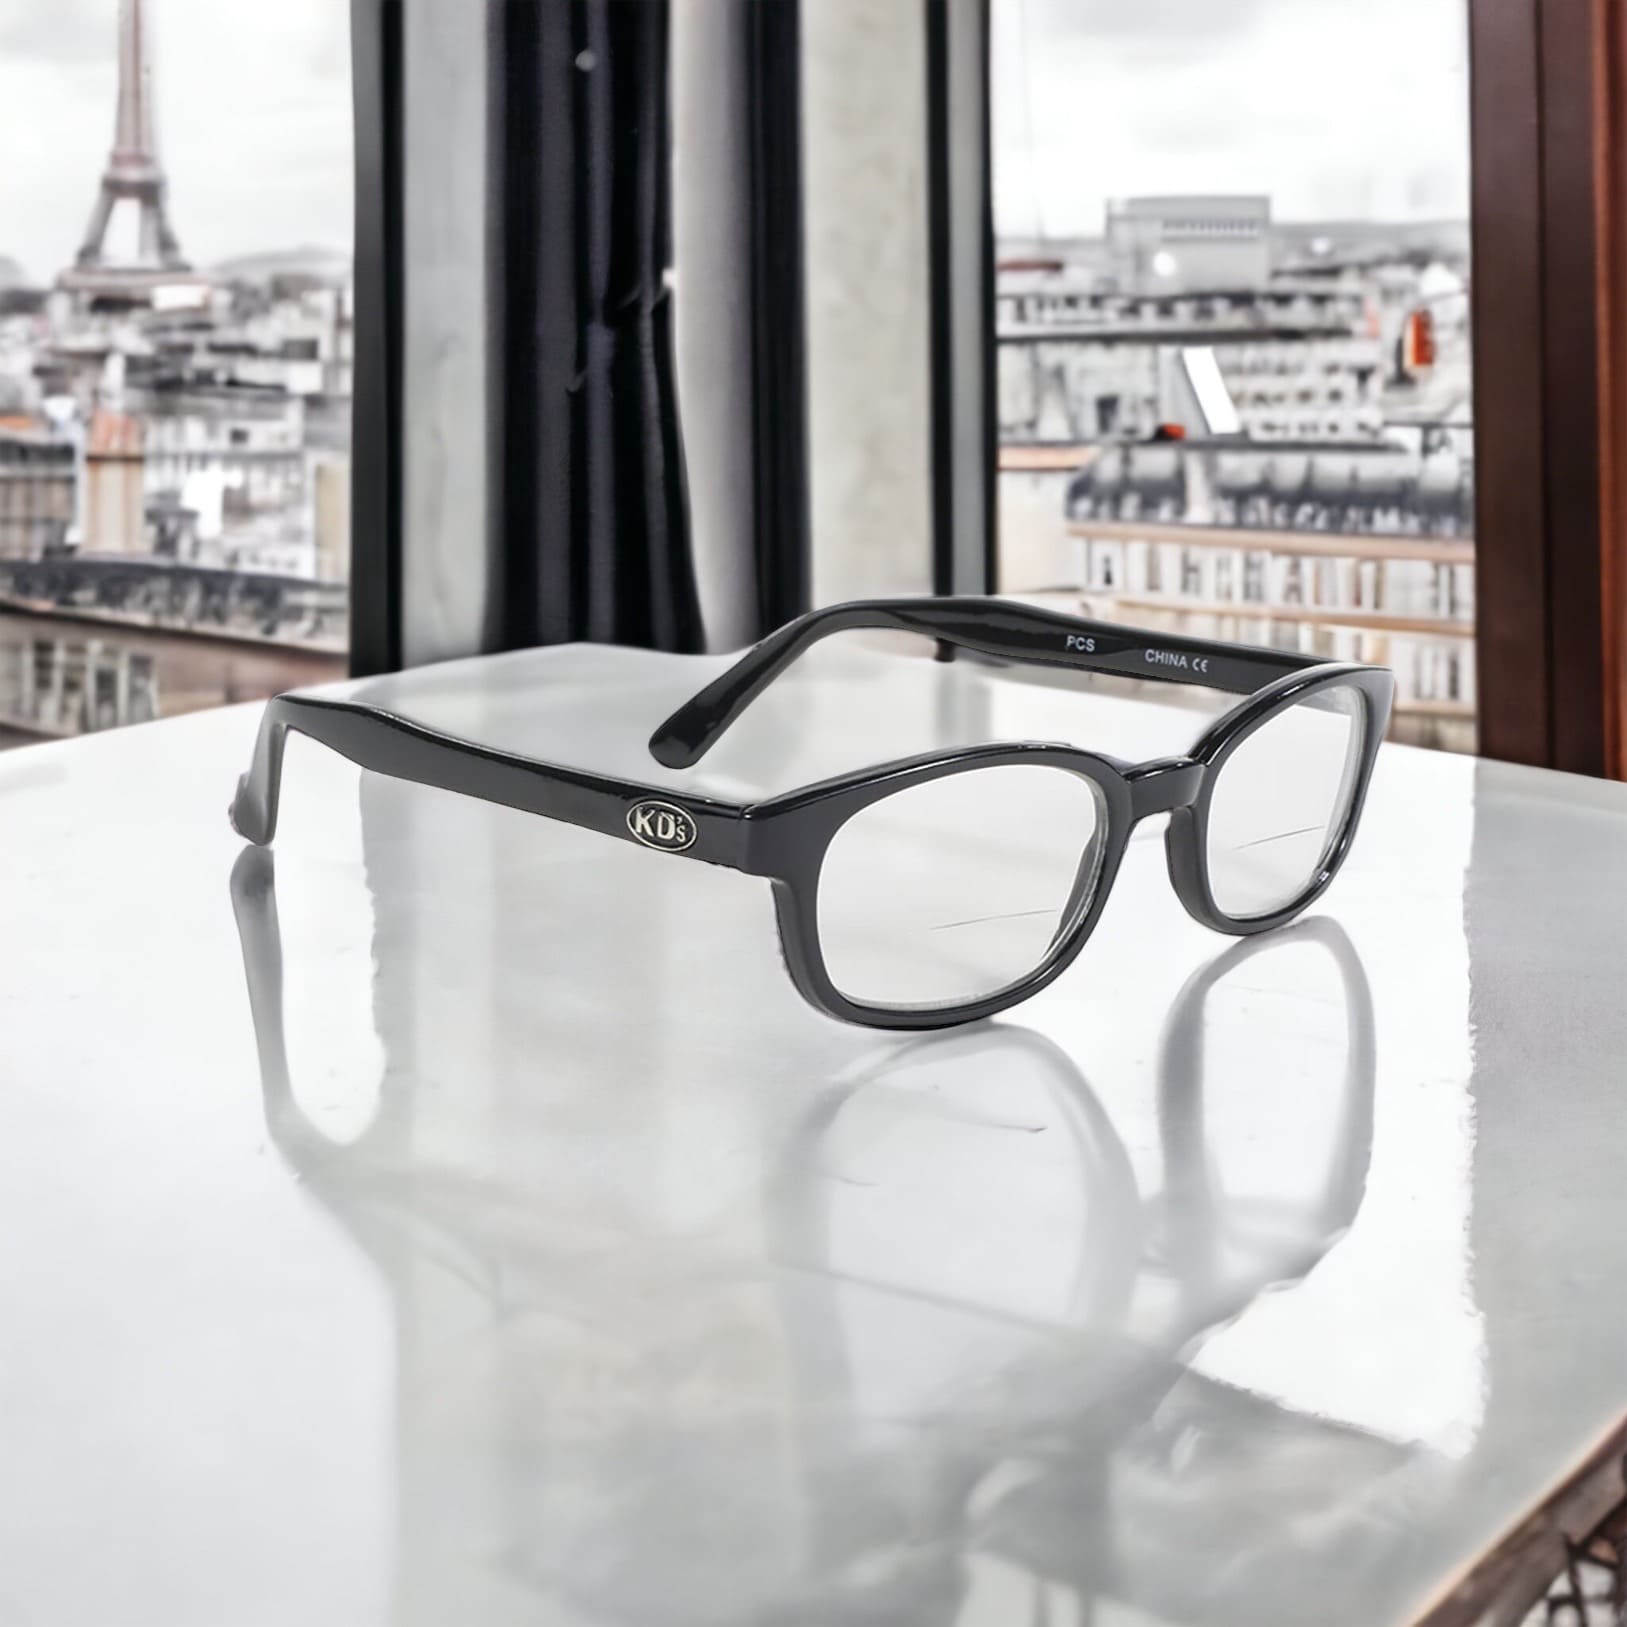 KD's readerz sunglasses with correction index. Worn by Jax Teller in Sons of Anarchy. With a stylish black frame and clear lenses. Placed on a table in front of a window with a view on Paris.